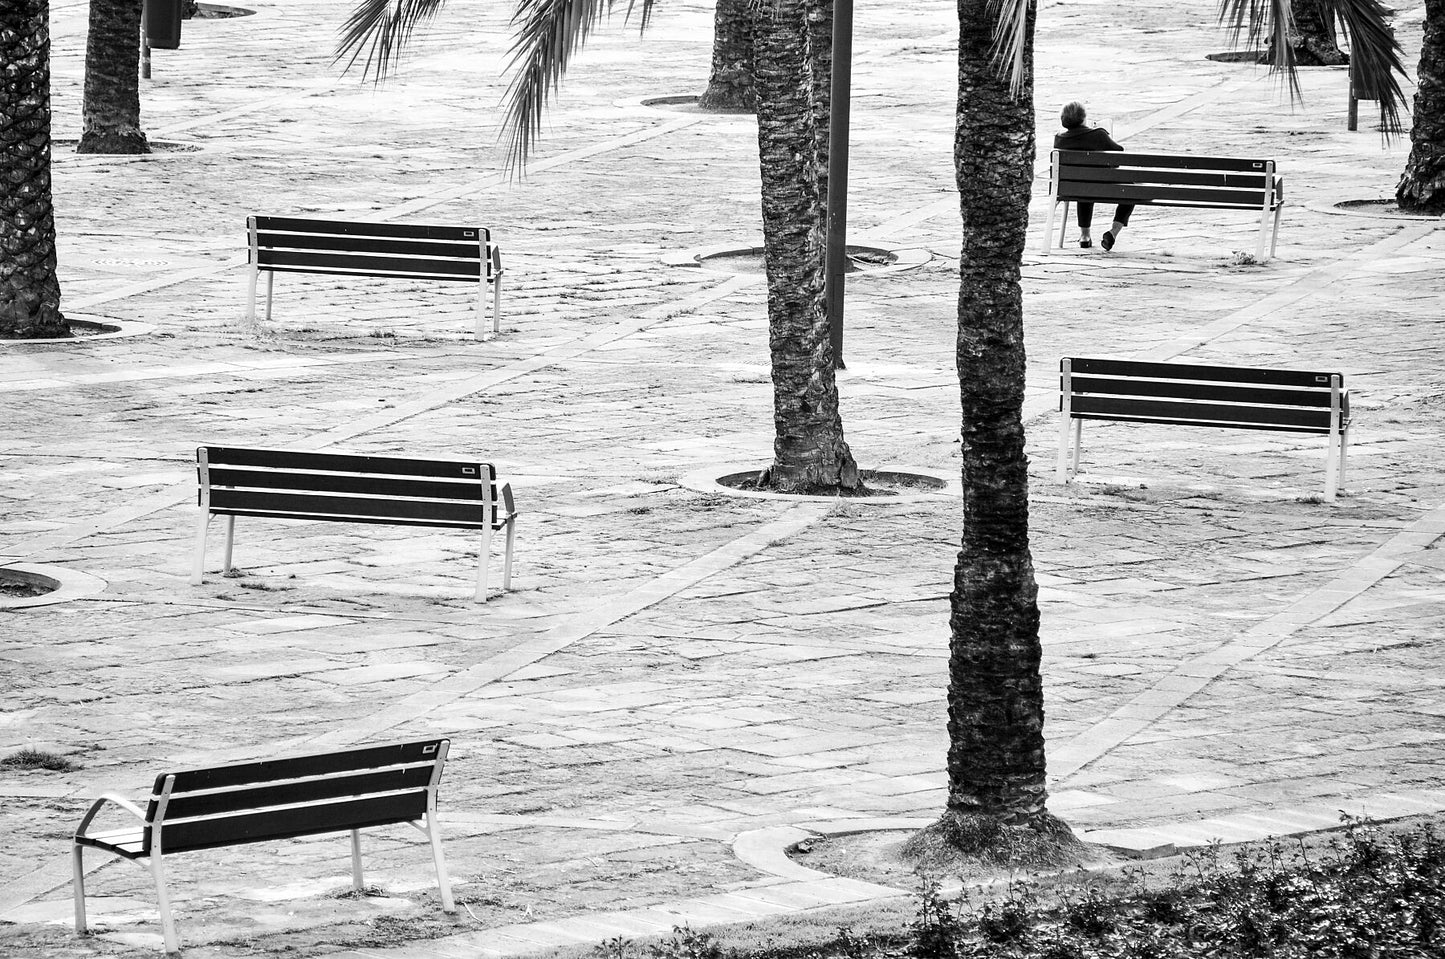 Black and white street photography, man on park bench, Mallorca, 2010